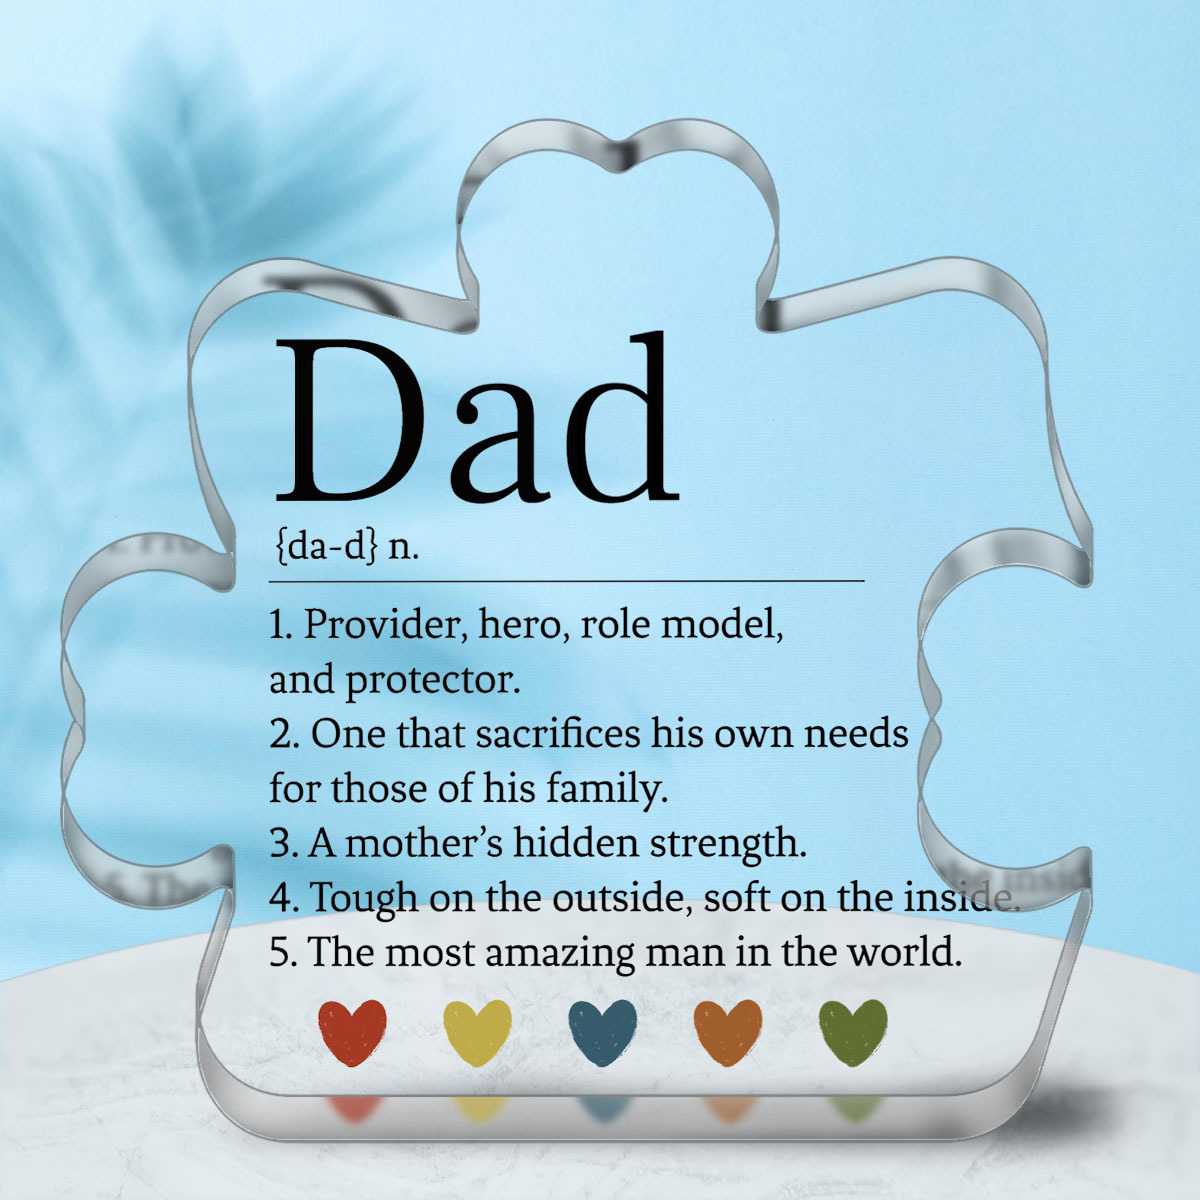 

1pc Acrylic Puzzle-shaped Plaque Retro Style, "best Dad" Appreciation Gift, From Daughter & Son, Ideal For Father's Birthday, Father's Day, Home & Office Decor